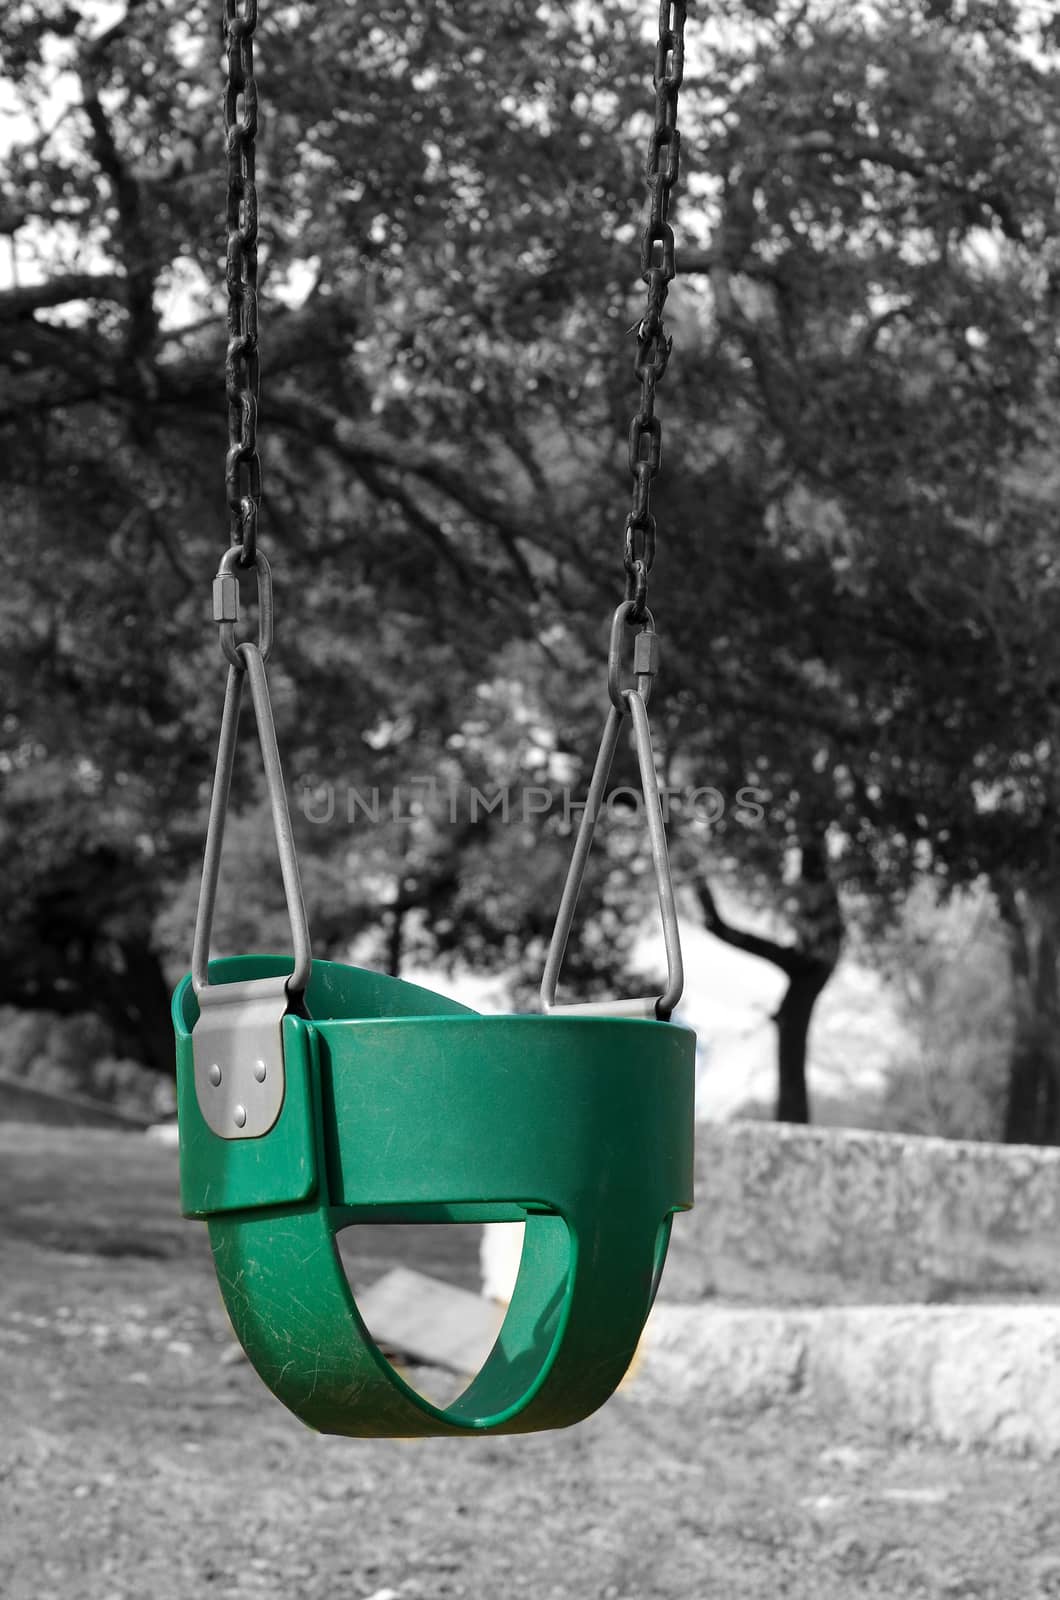 A green infant's swing hangs stationary and empty in a park